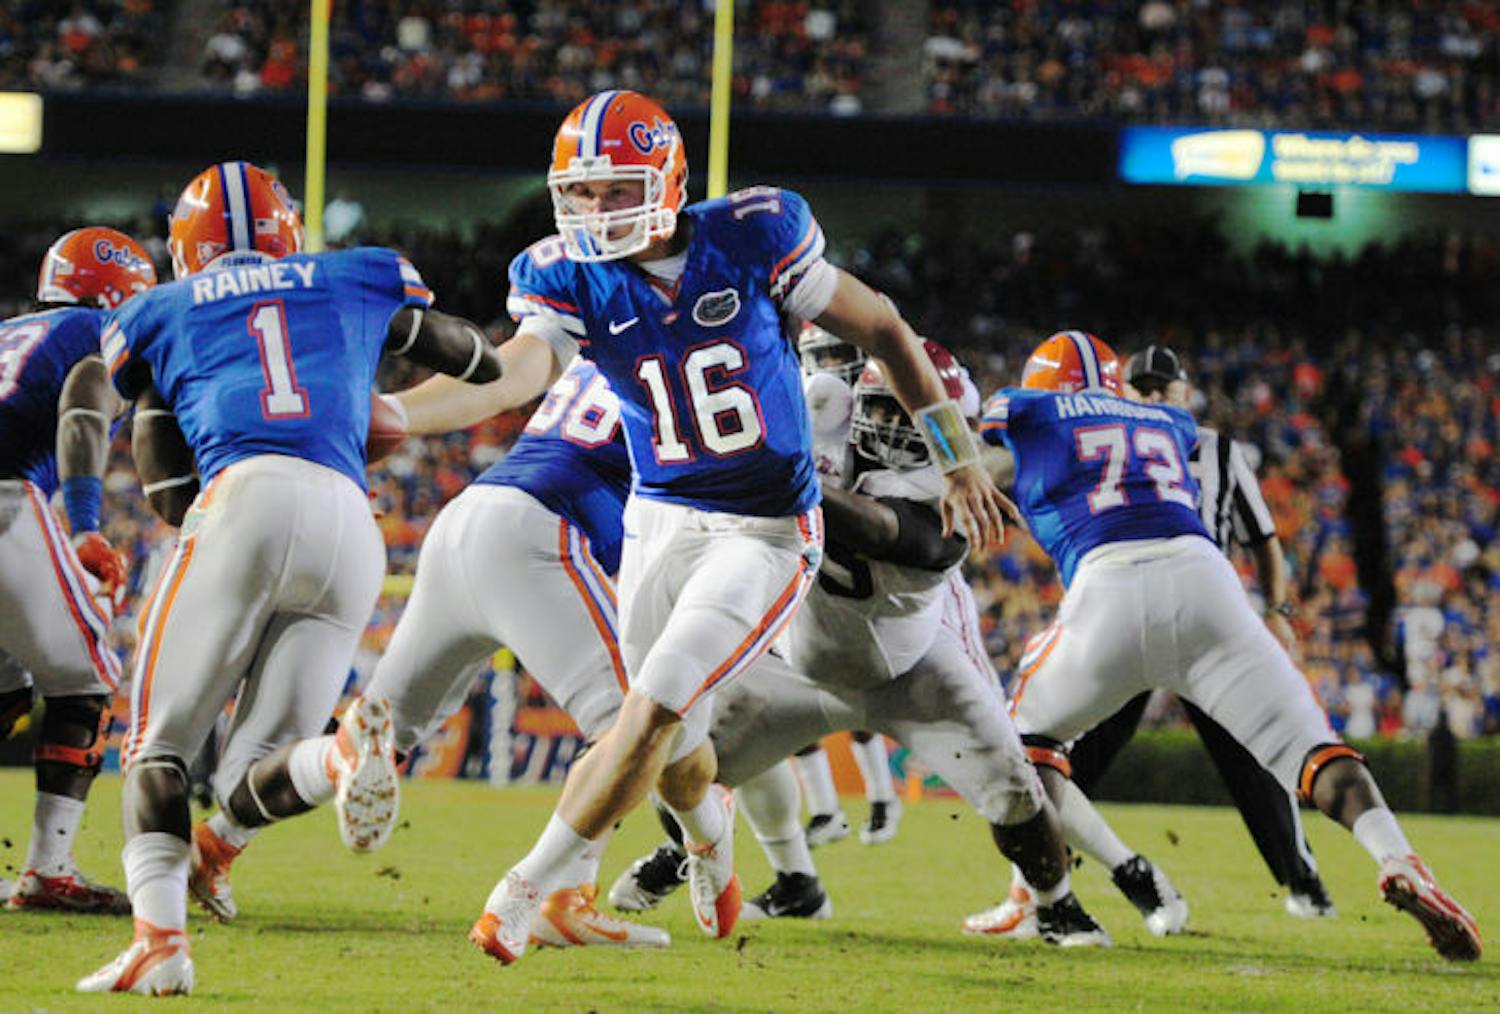 Quarterback Jeff Driskel hands off the ball to running back Chris Rainey during Florida’s 38-10 loss to Alabama in Ben Hill Griffin Stadium on Oct. 1, 2011.